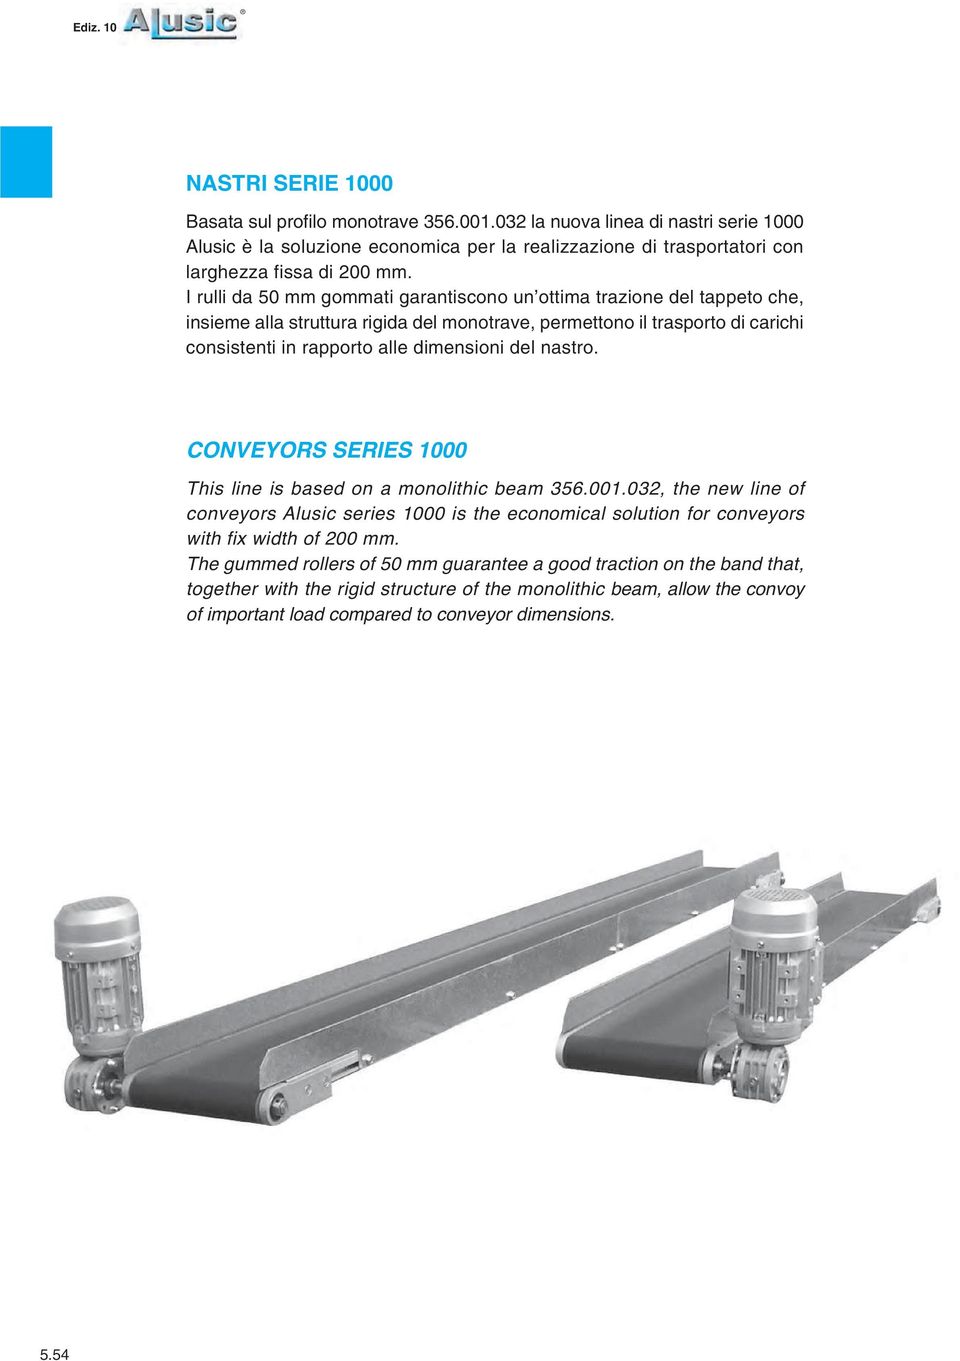 nastro. CONVEYORS SERIES 000 This line is based on a monolithic beam 356.00.032, the new line of conveyors Alusic series 000 is the economical solution for conveyors with fix width of 200 mm.